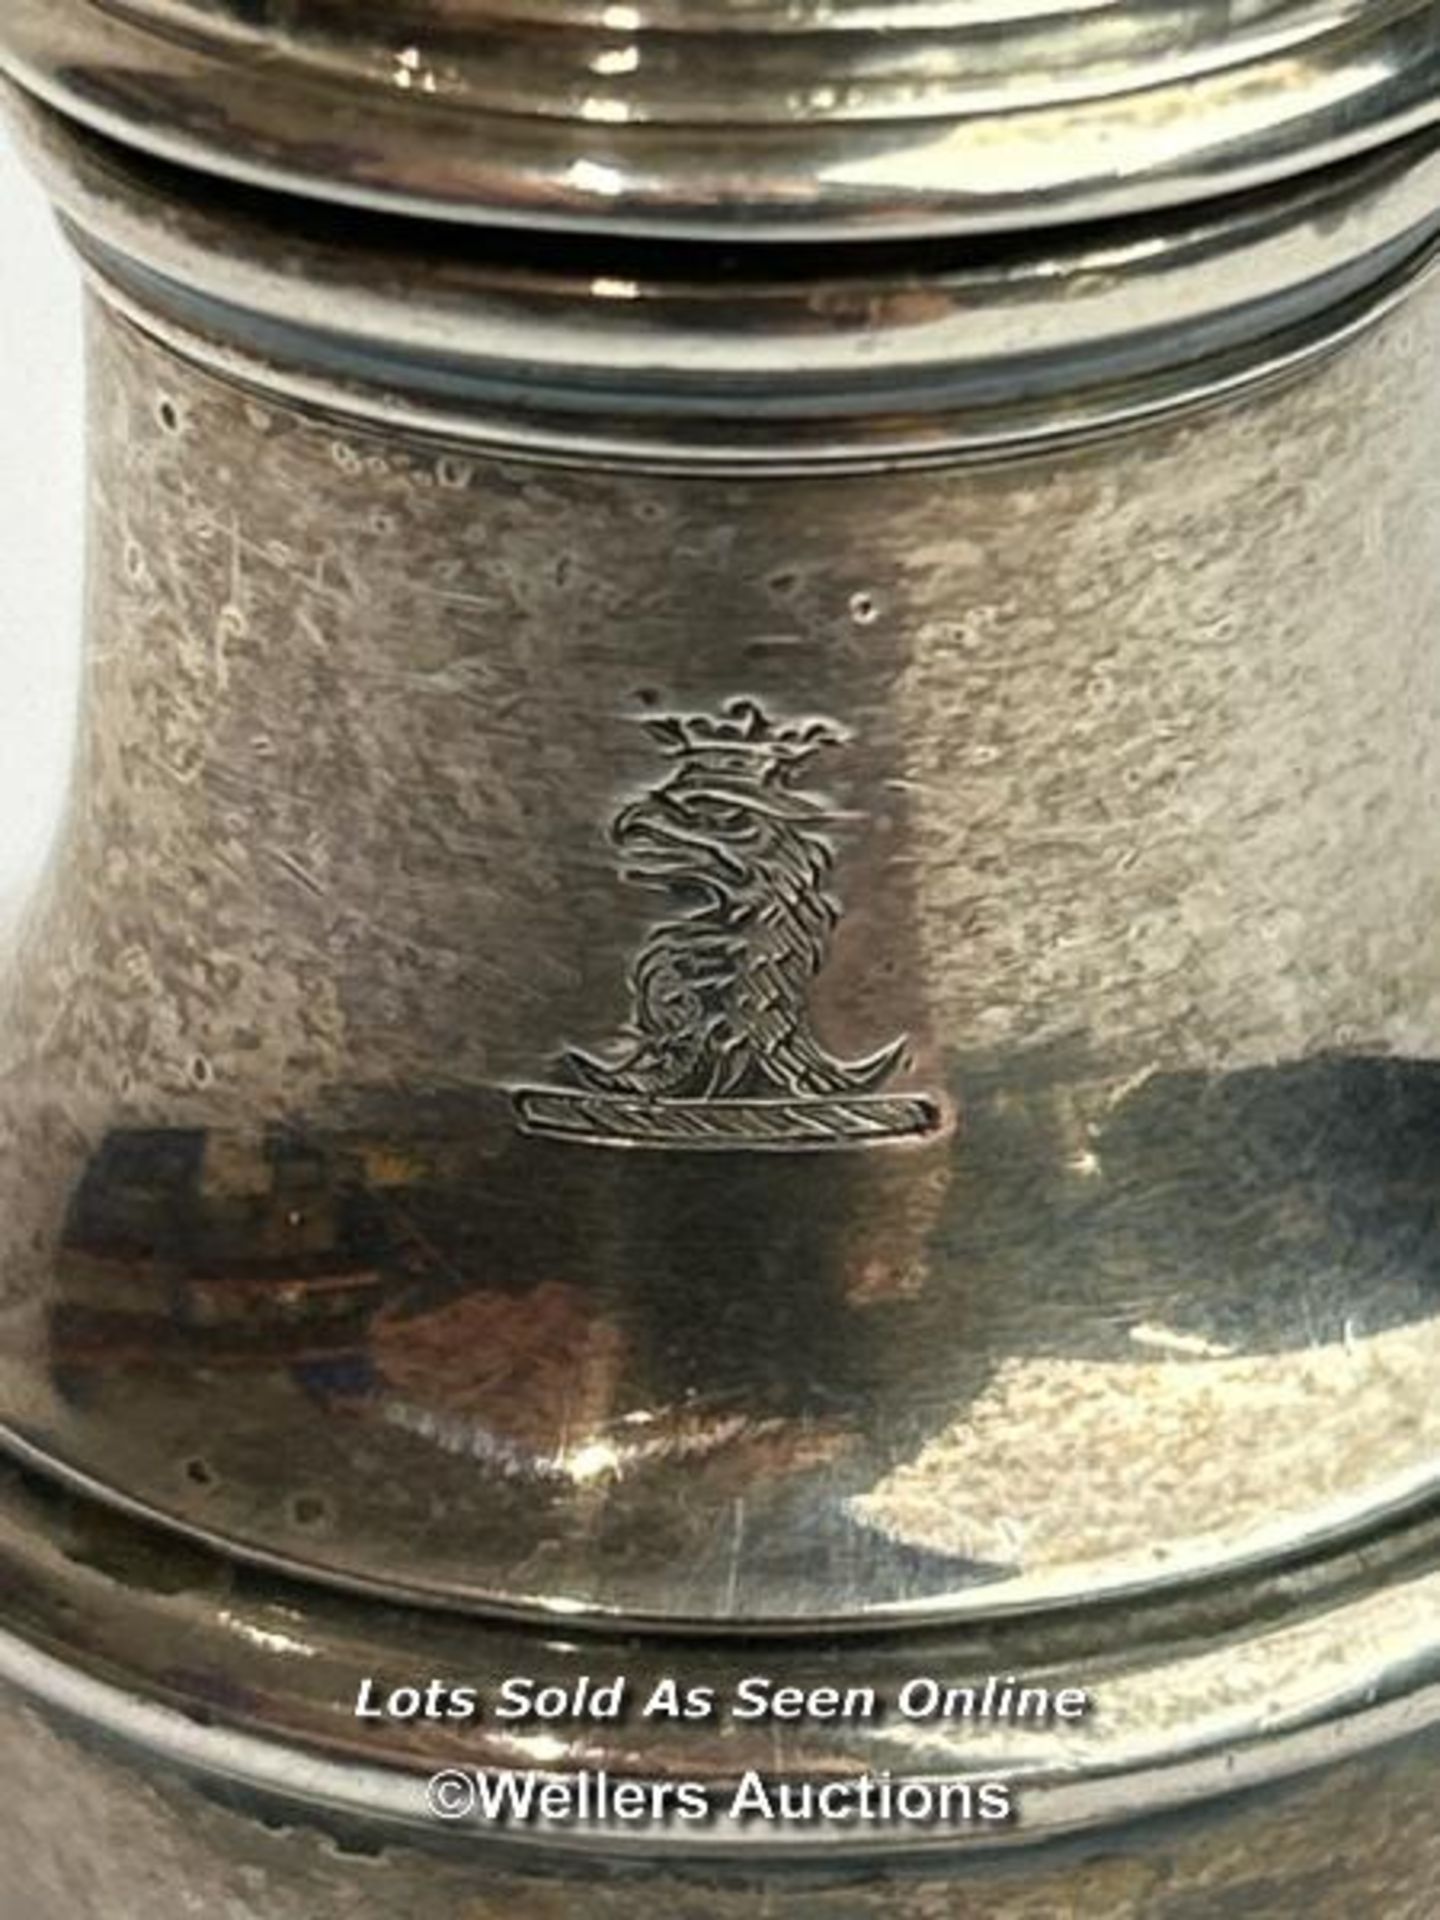 Antique sterling silver pepper pot, 9cm high, 50g / SF - Image 2 of 4